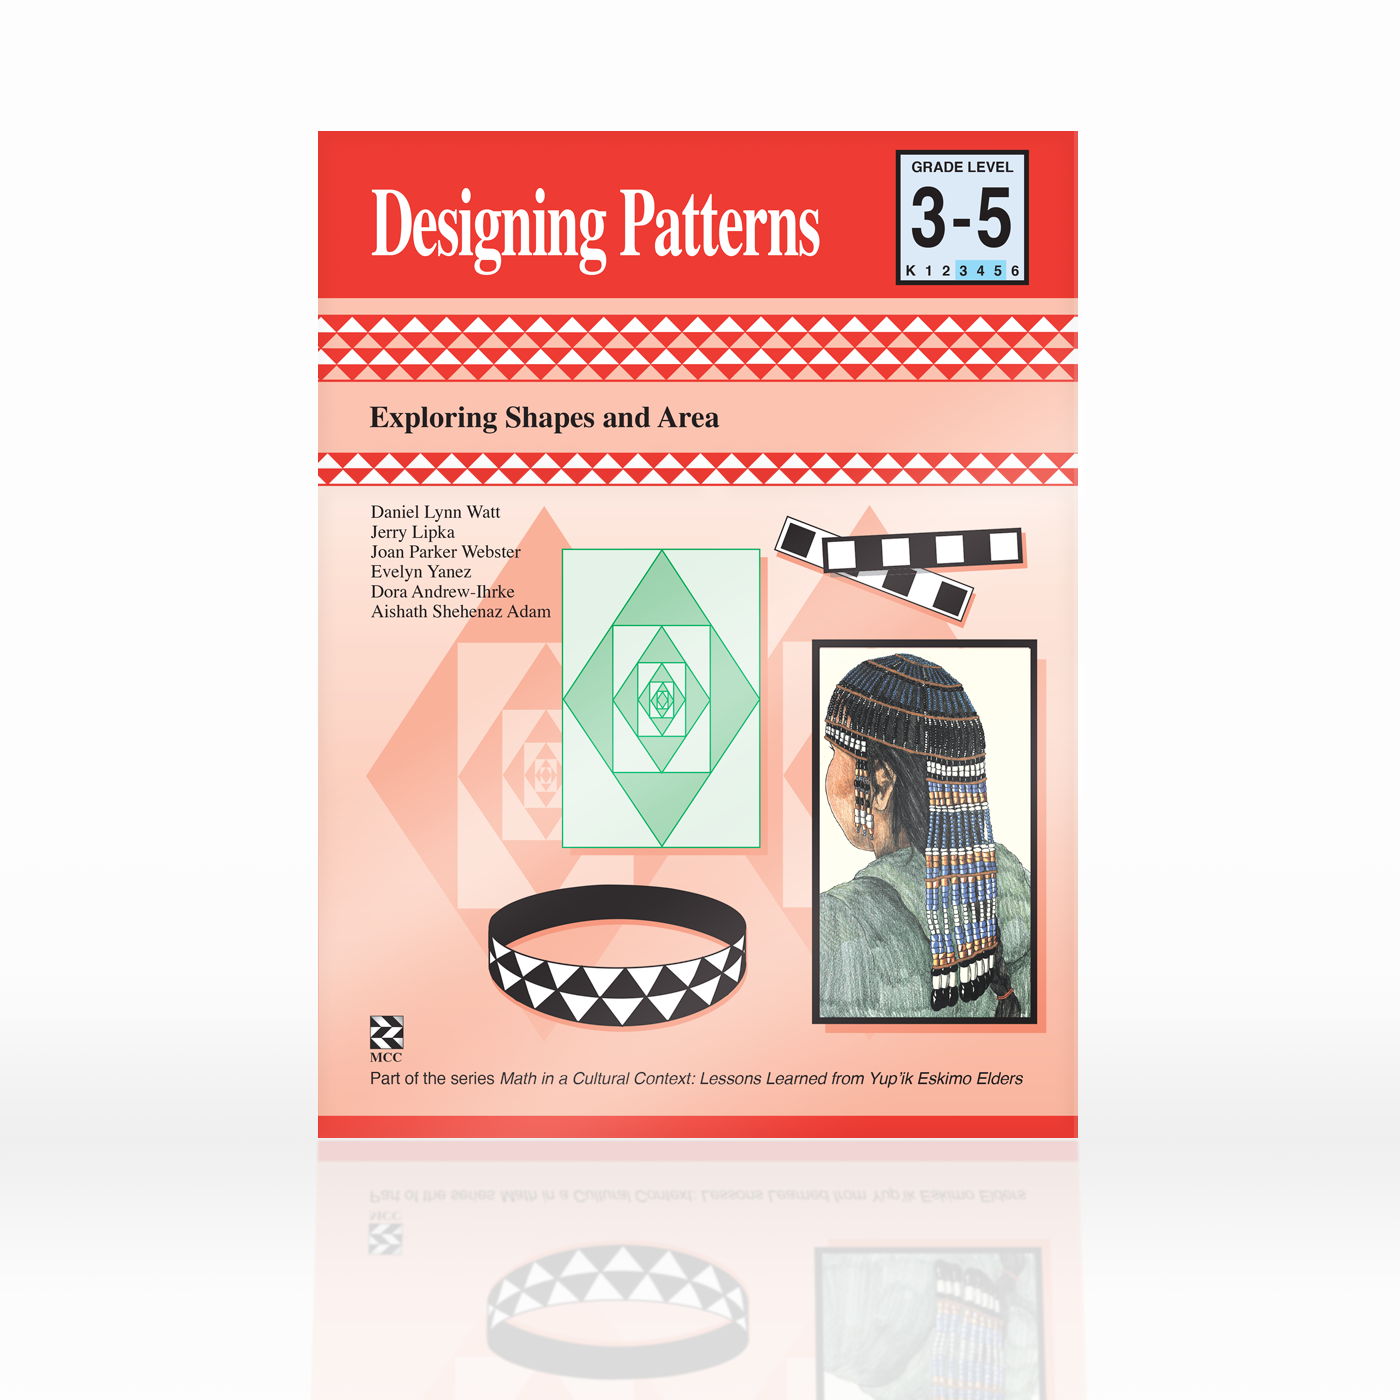 Designing Patterns module cover